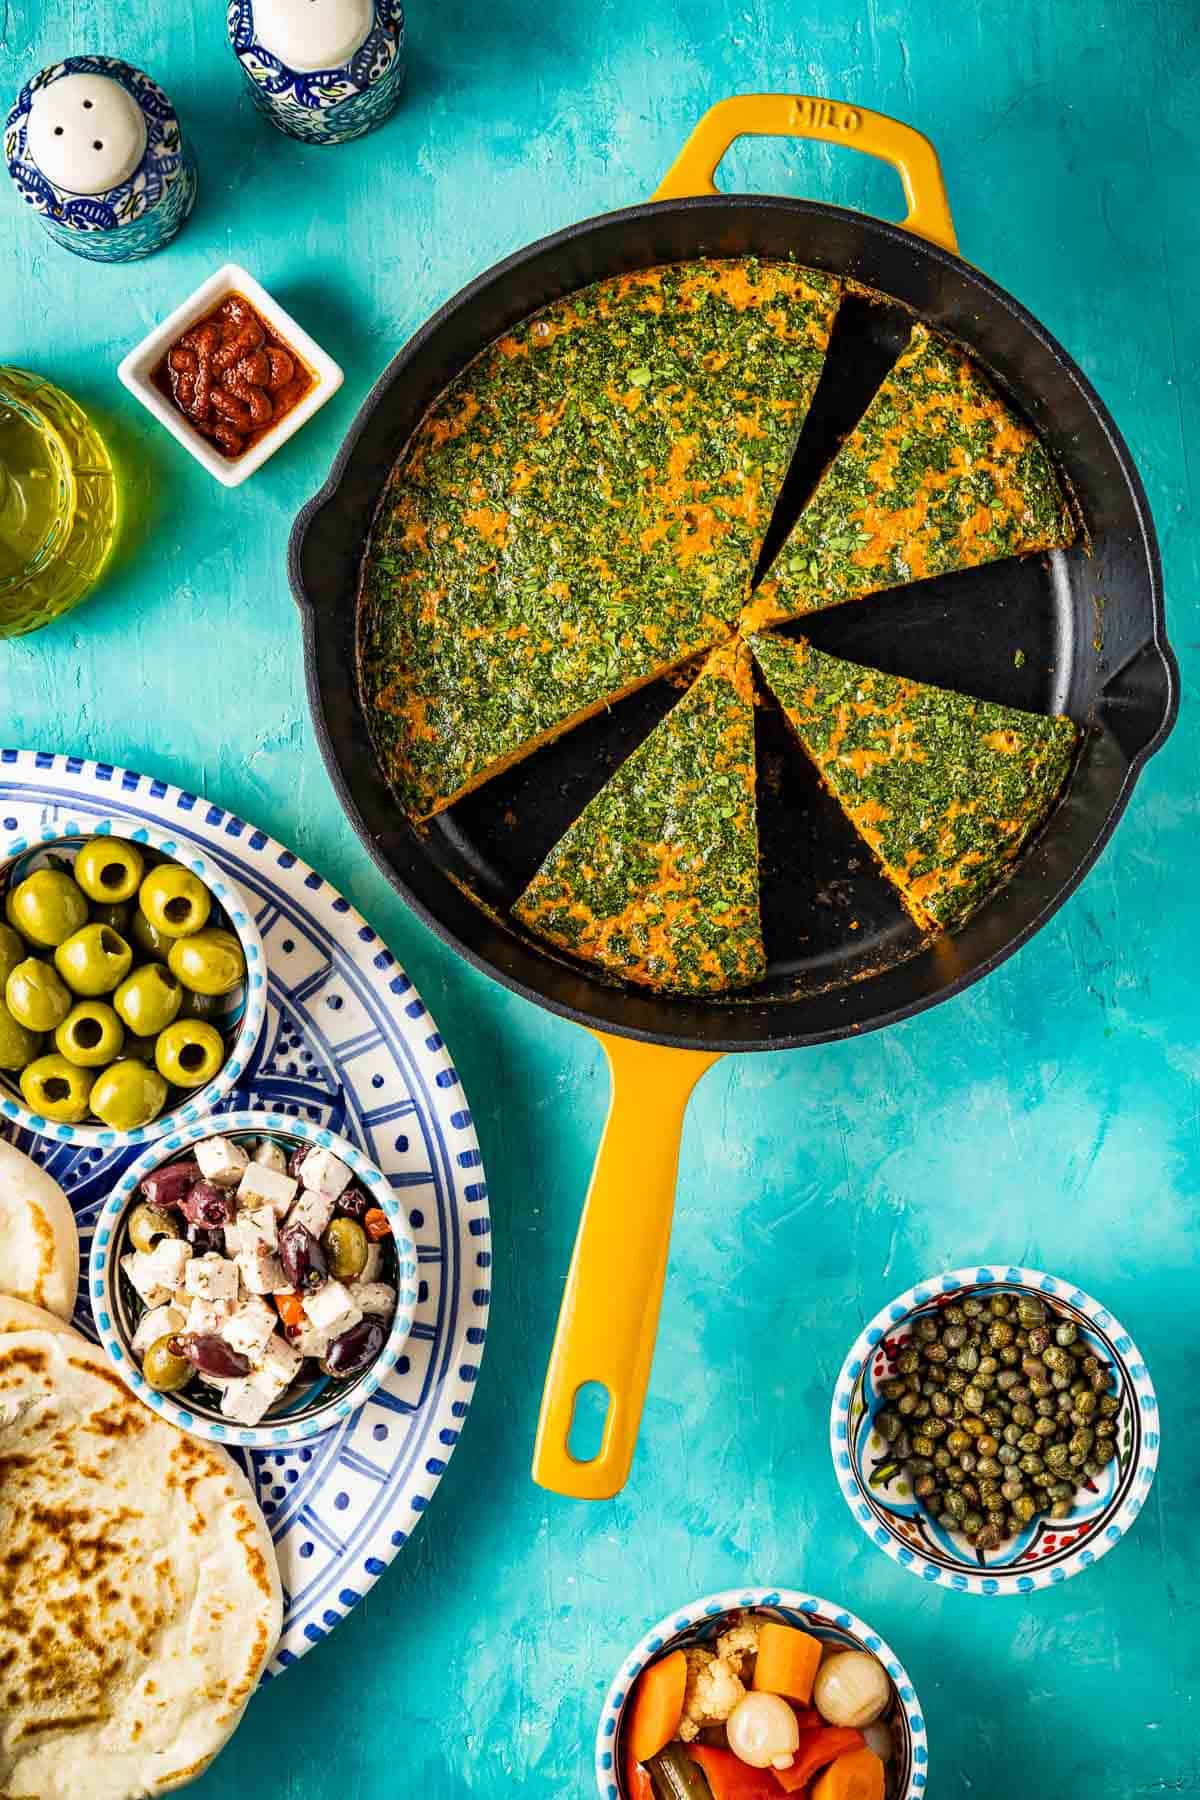 An overhead photo of Tunisian style baked frittata with carrot cut into slices in a skillet. This is surrounded pita bread, salt and pepper shakers, and small bowls of harissa, capers, green olives, marinated feta and olives, and giadiniera.